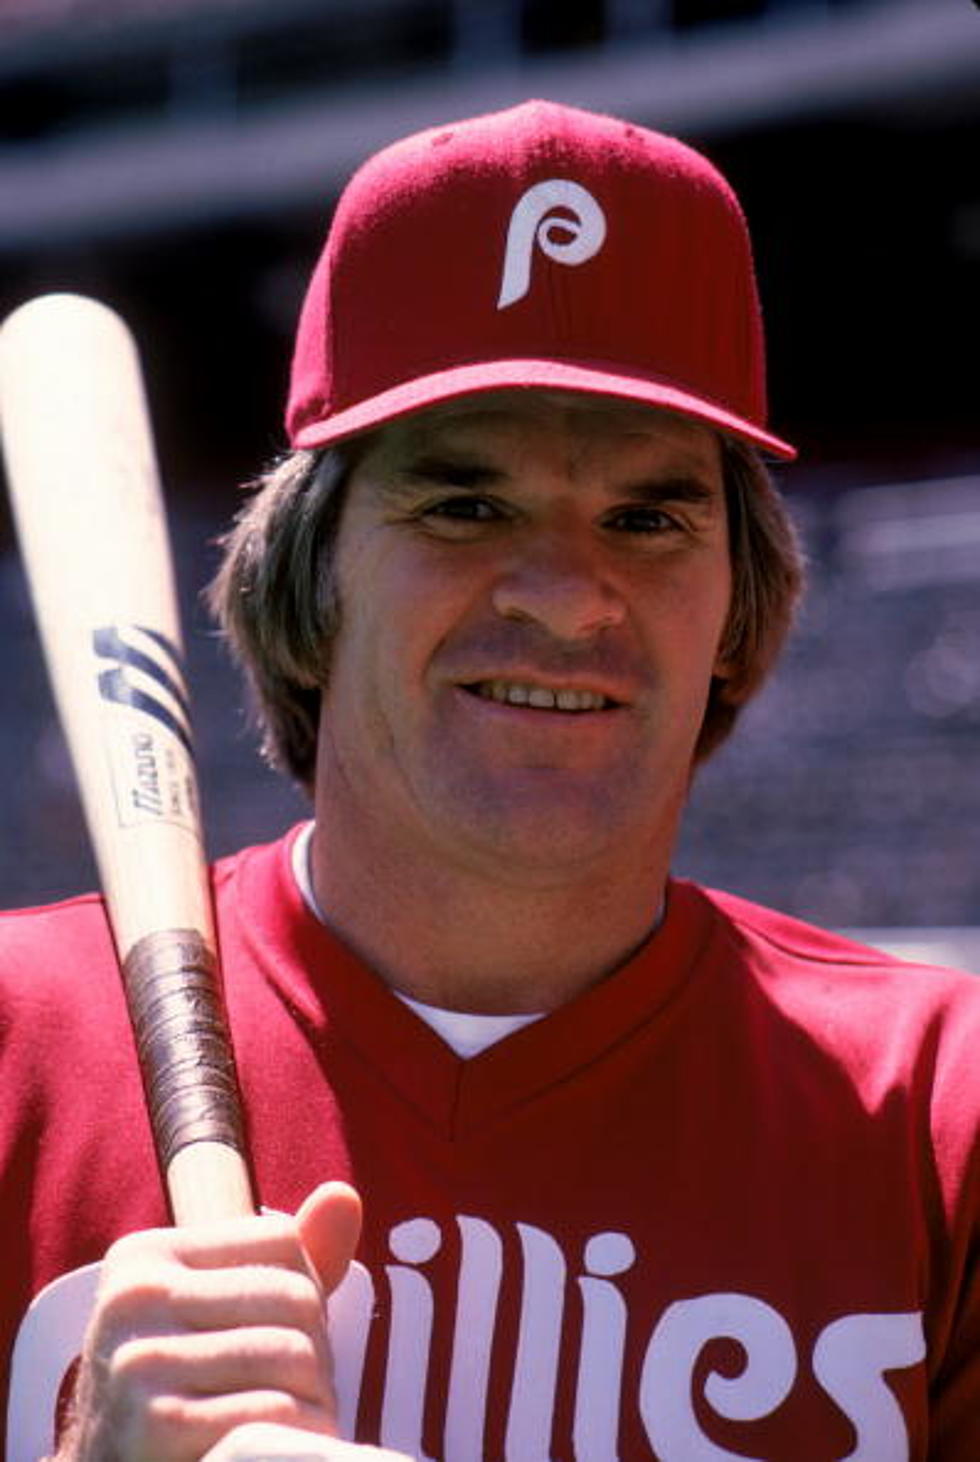 Pete Rose and Phillies: The Illusion of Morality in Sports